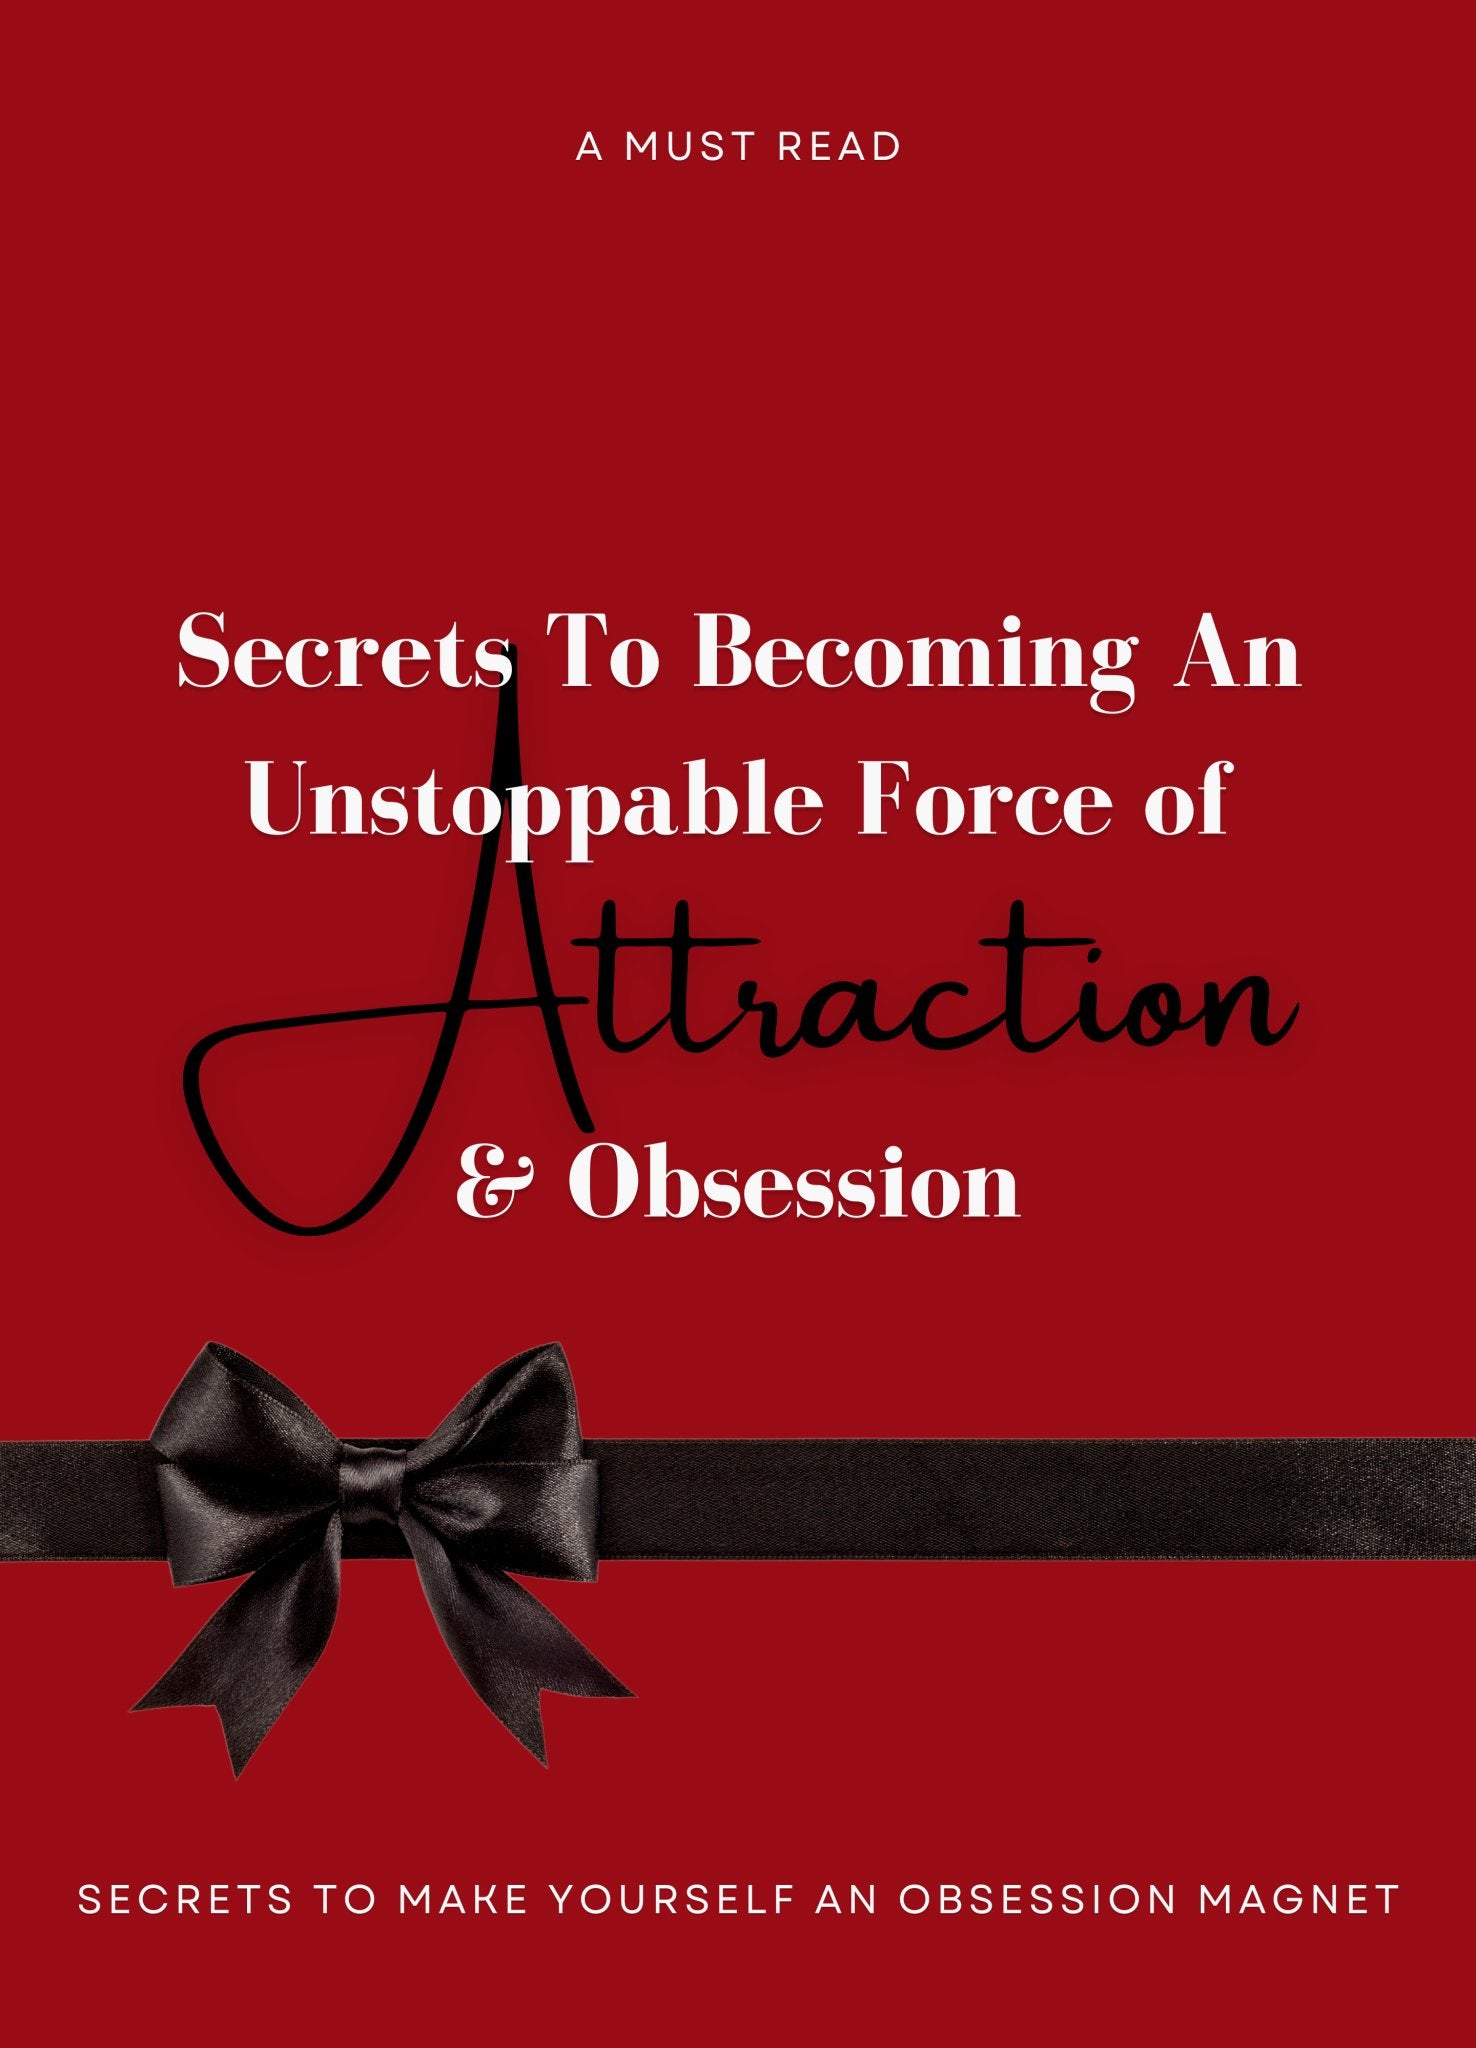 Secrets To Becoming An Unstoppable Force Of Attraction & Obsession - MojobakMojobak Secrets To Becoming An Unstoppable Force Of Attraction & ObsessionSecrets To Becoming An Unstoppable Force Of Attraction & Obsession